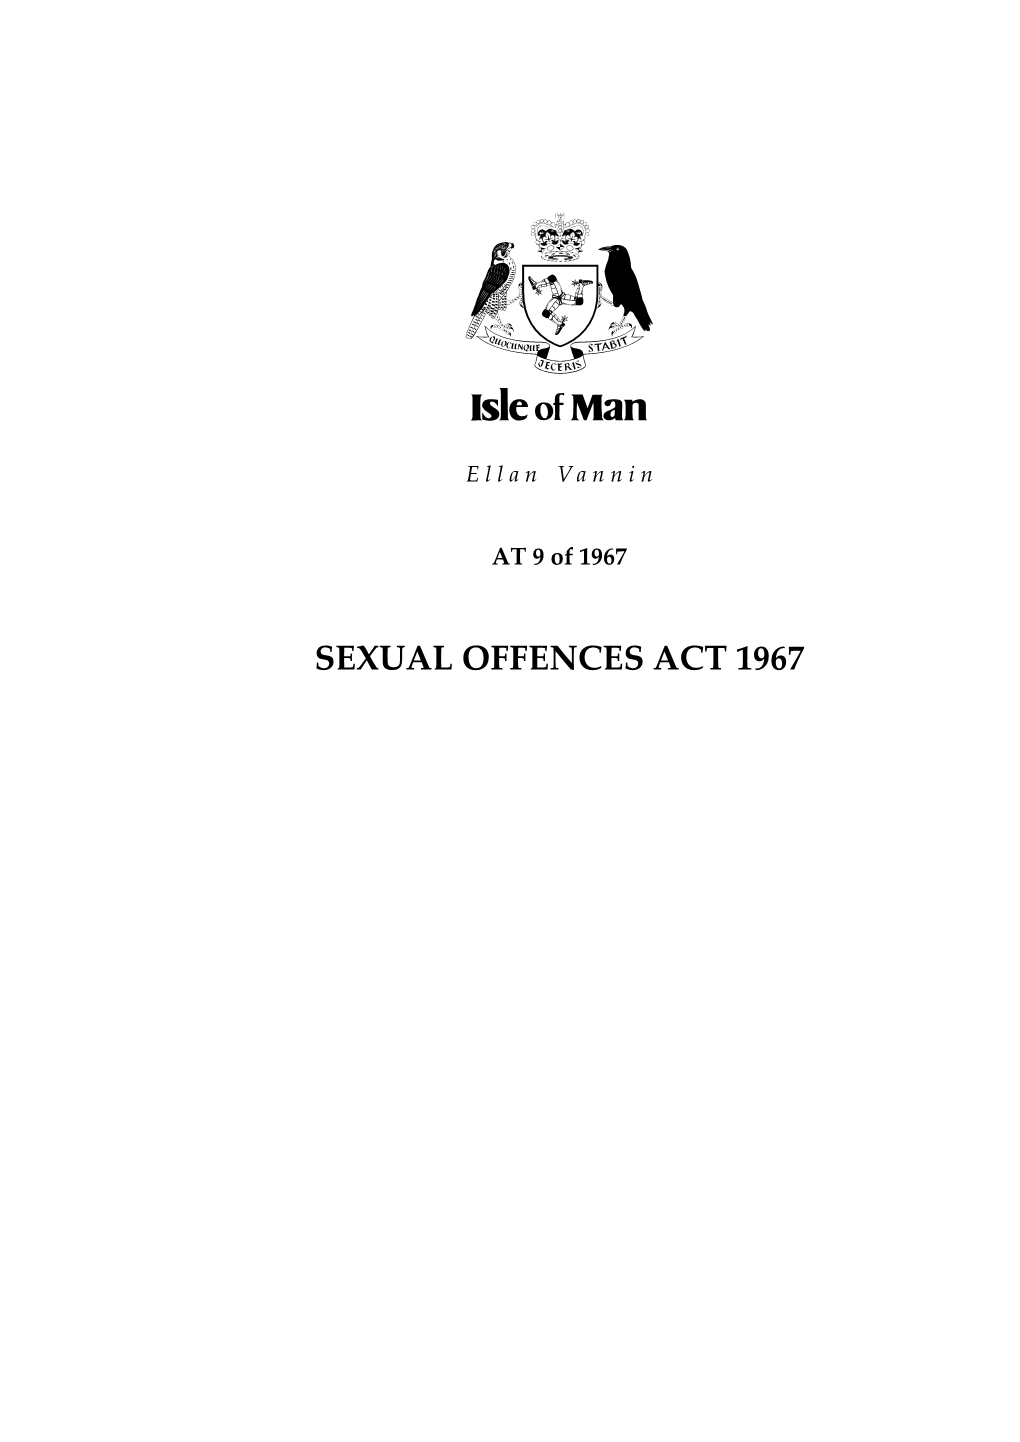 Sexual Offences Act 1967